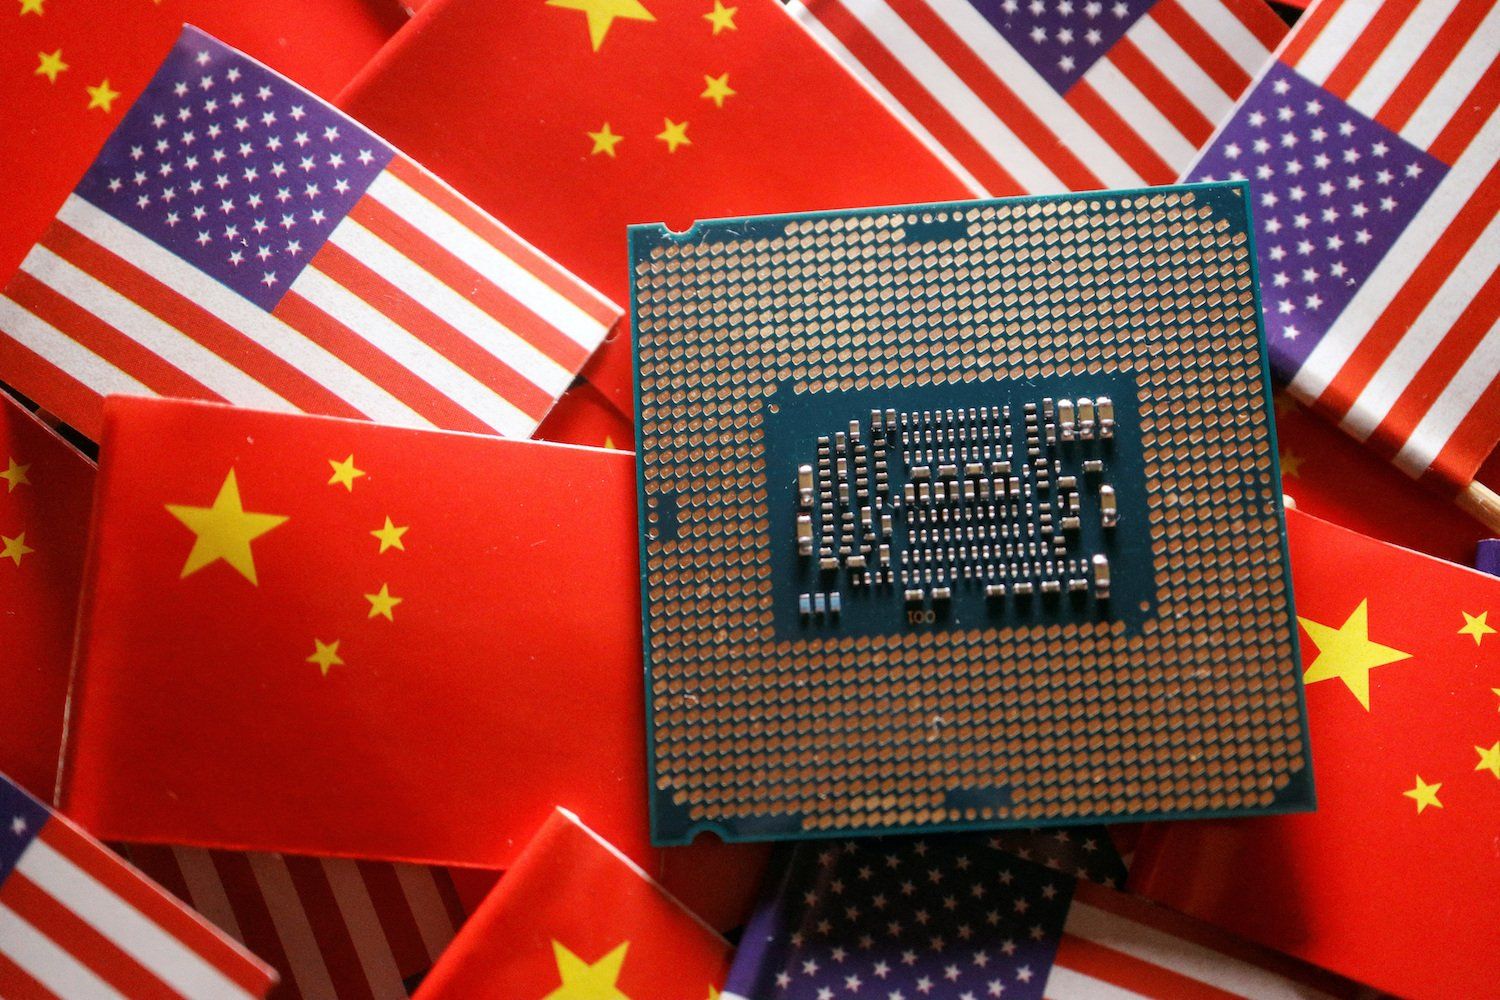 A central processing unit (CPU) semiconductor chip is displayed among flags of China and U.S., February 17, 2023.